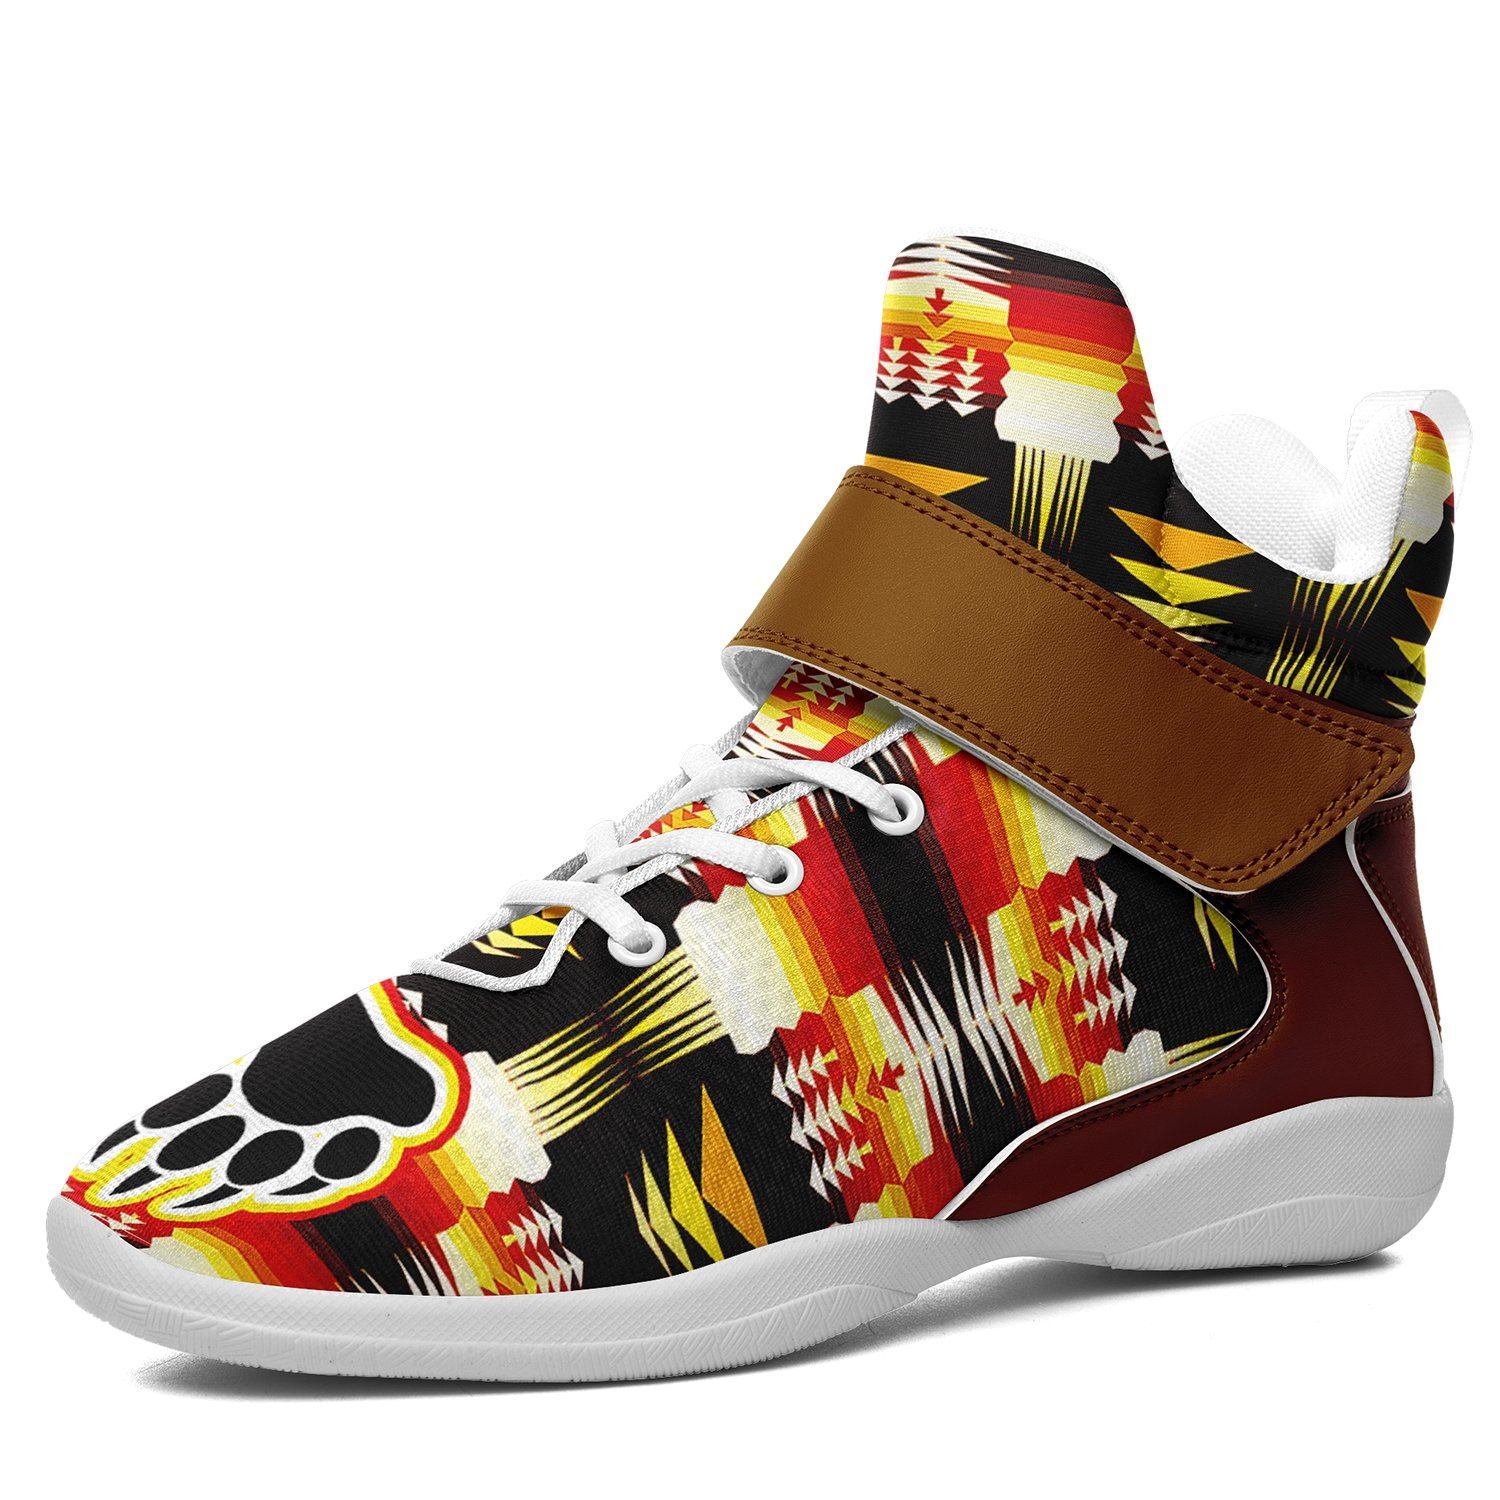 Medicine Wheel Sage Bearpaw Ipottaa Basketball / Sport High Top Shoes - White Sole 49 Dzine US Men 7 / EUR 40 White Sole with Brown Strap 